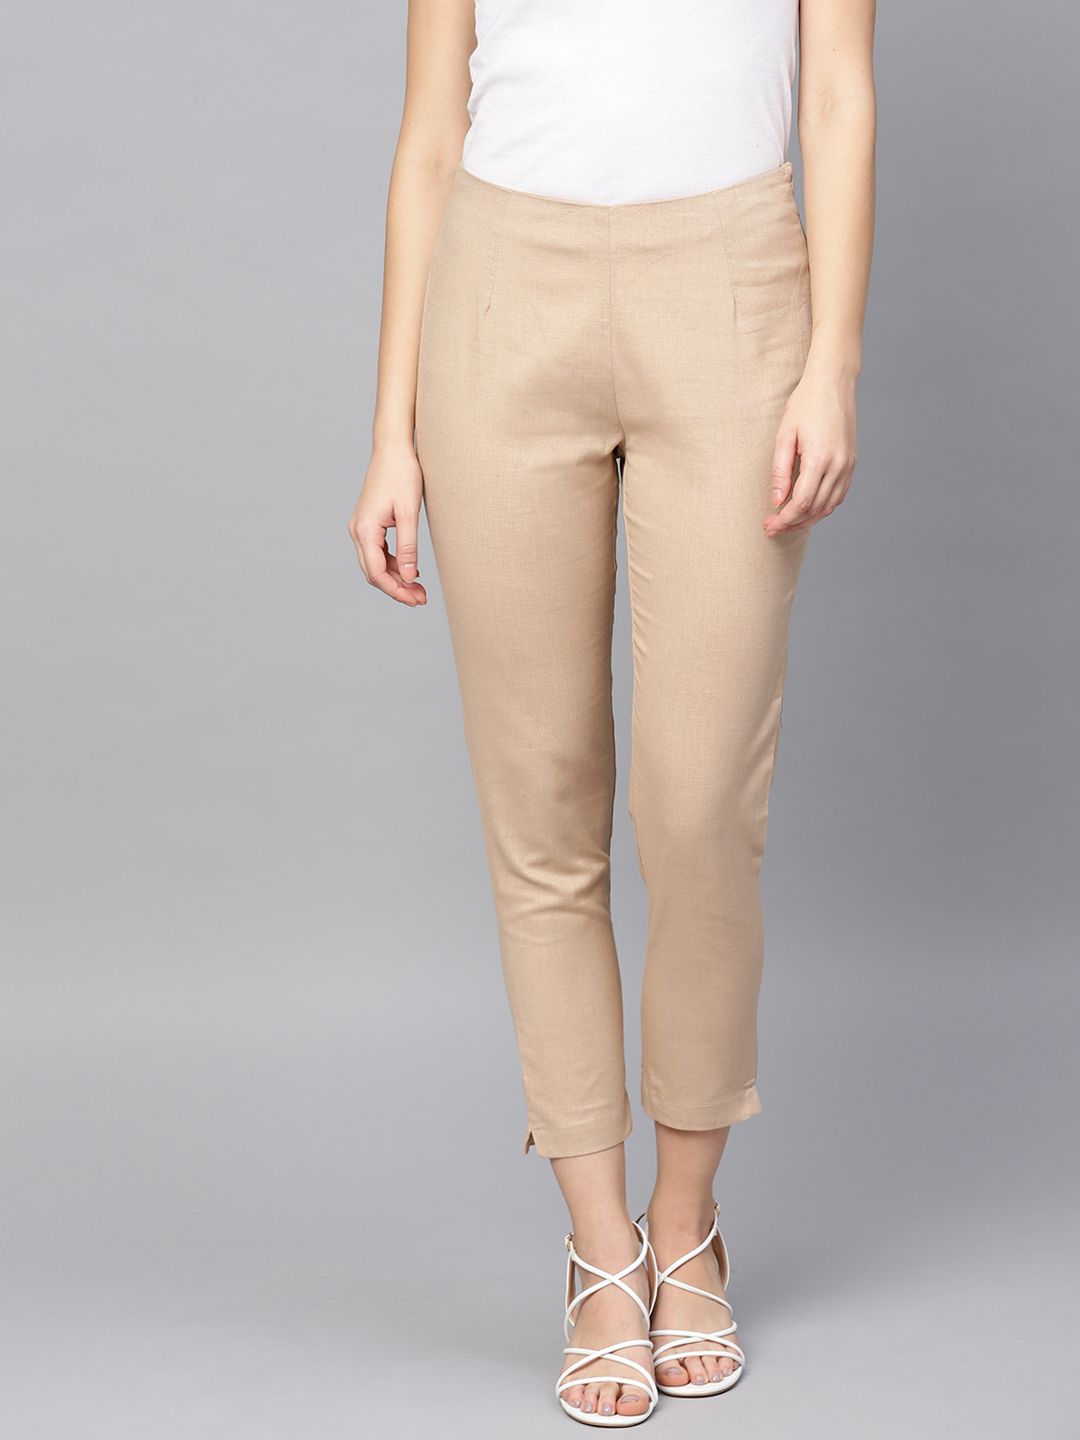 W Women Beige Regular Fit Solid Regular Cropped Trousers Price in India